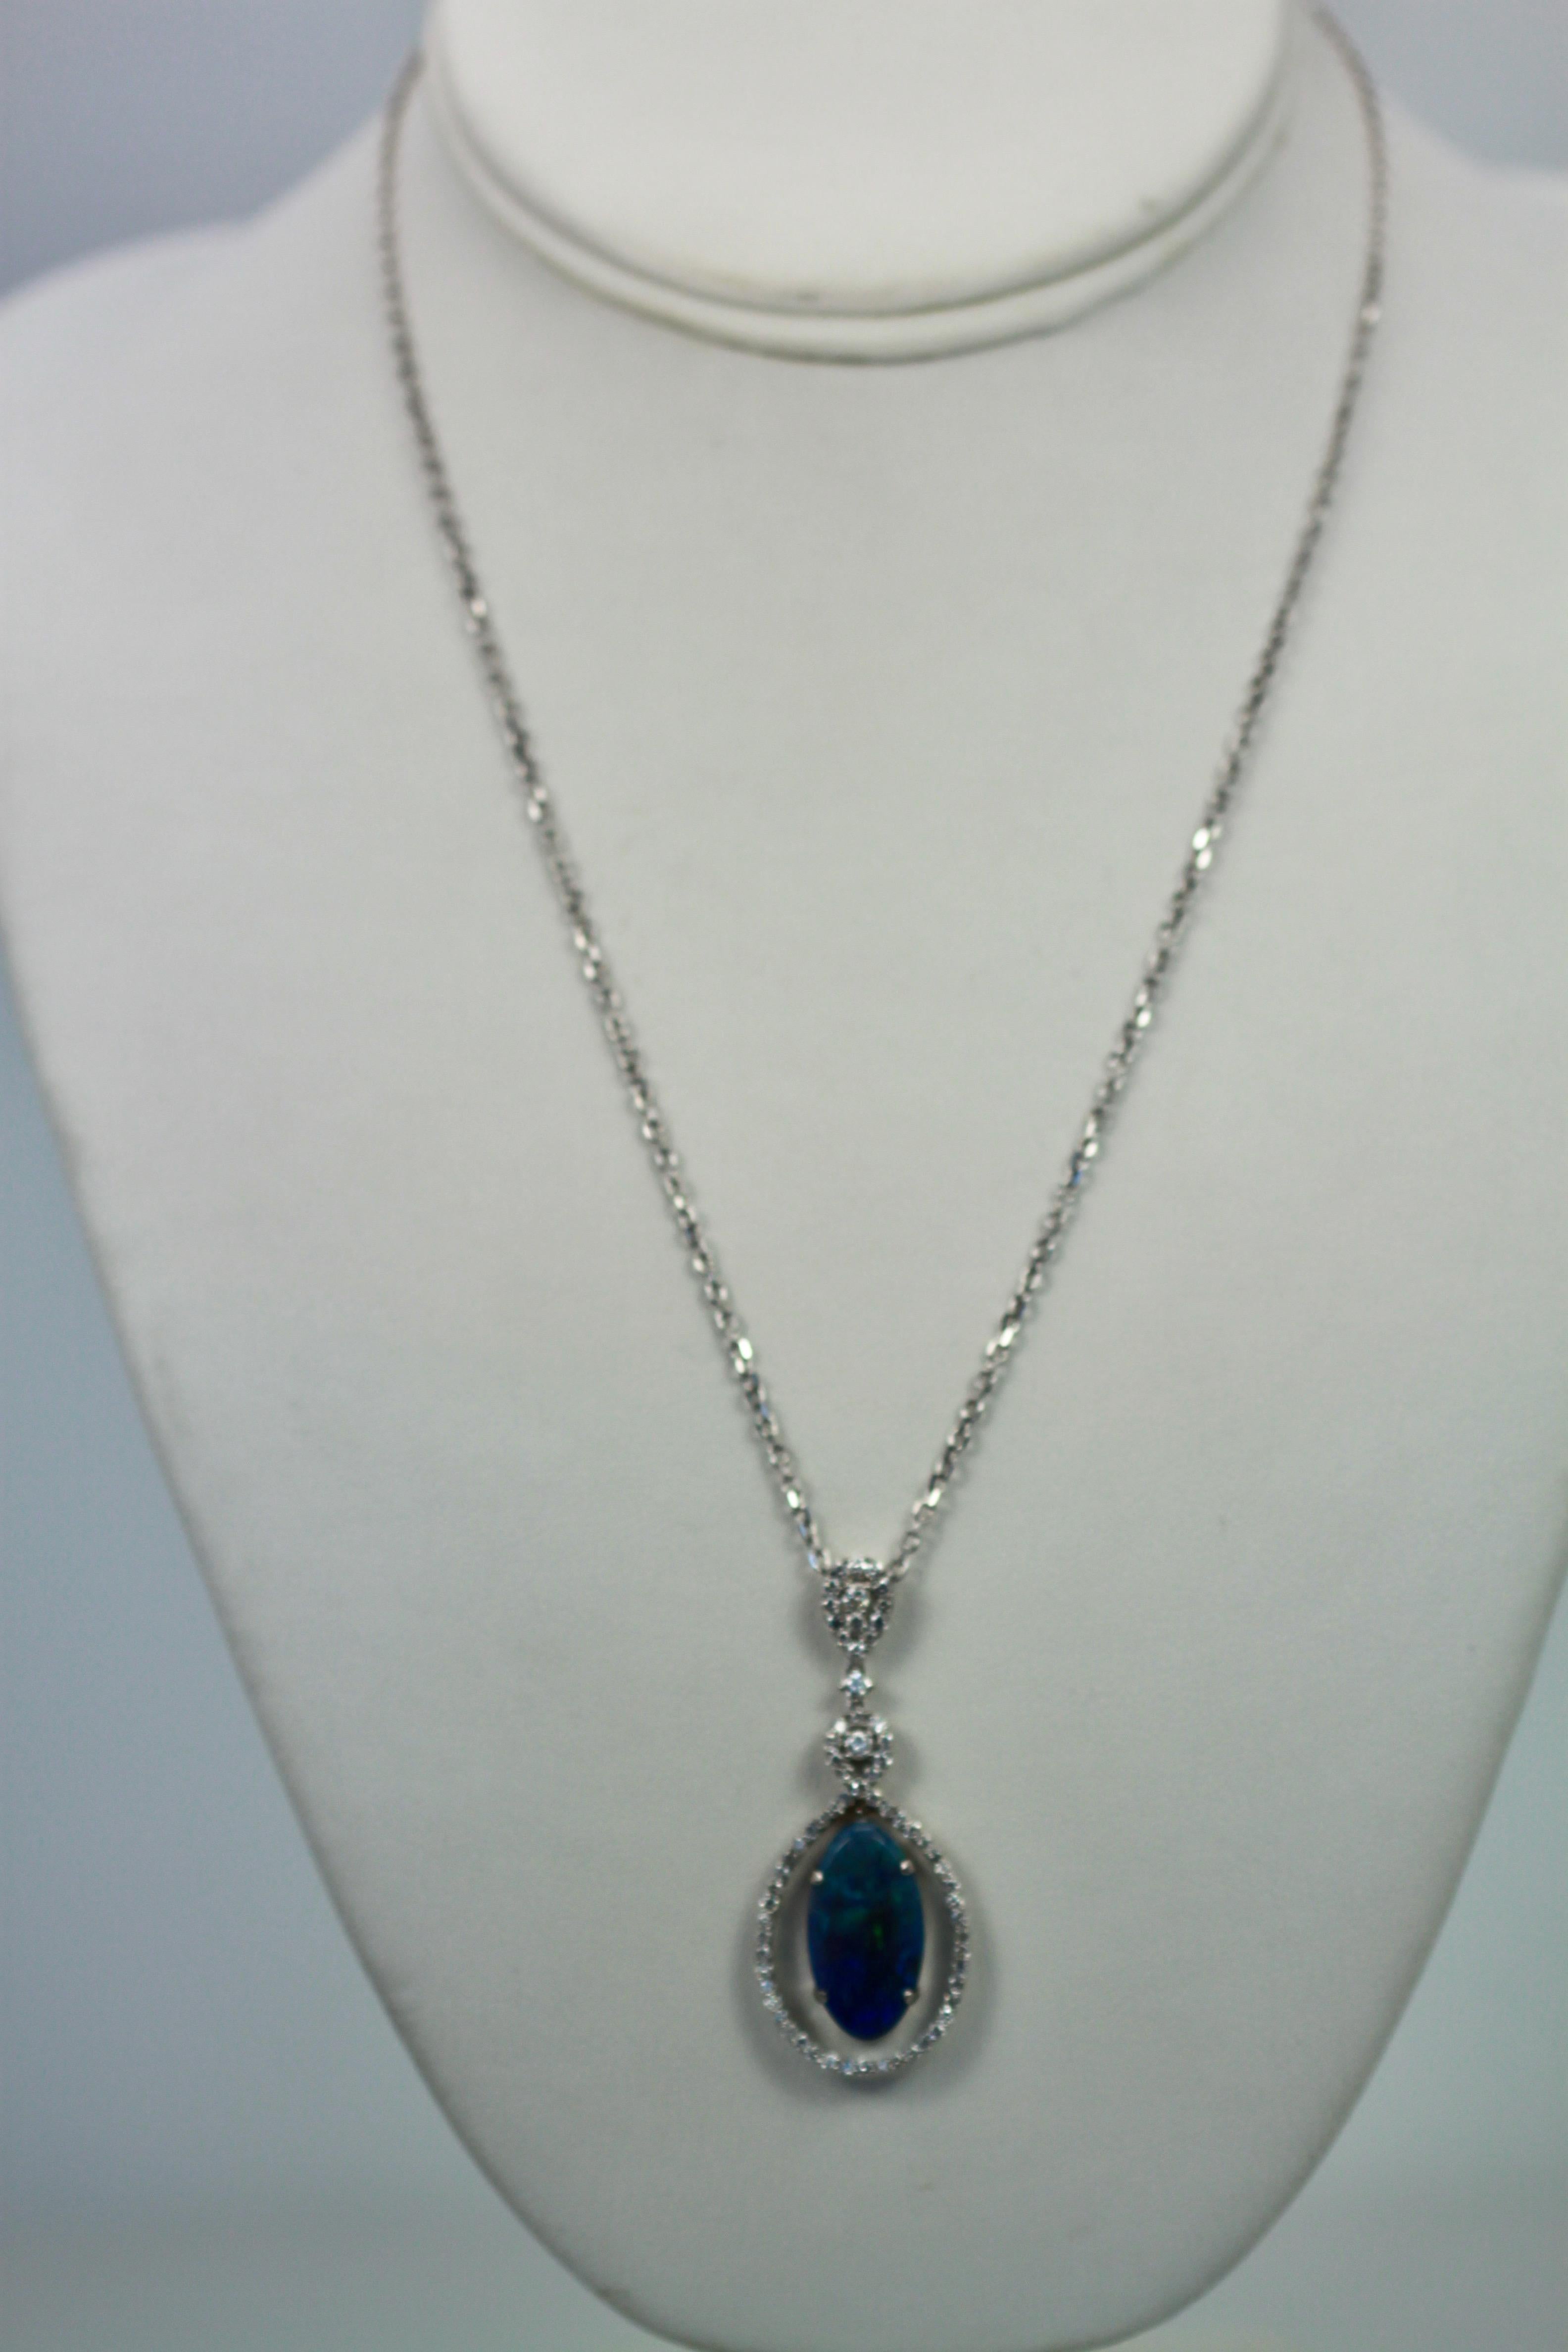 This Black Crystal Opal measures 20.4 x 11.0 x 3.4 and totals 5.23 Carats, the Diamond surround and loop weights in at 1.00 carat.  This pendant is 5cm long and 2cm wide.  Beautiful colors of blues purple and greens.  Comes with a 18